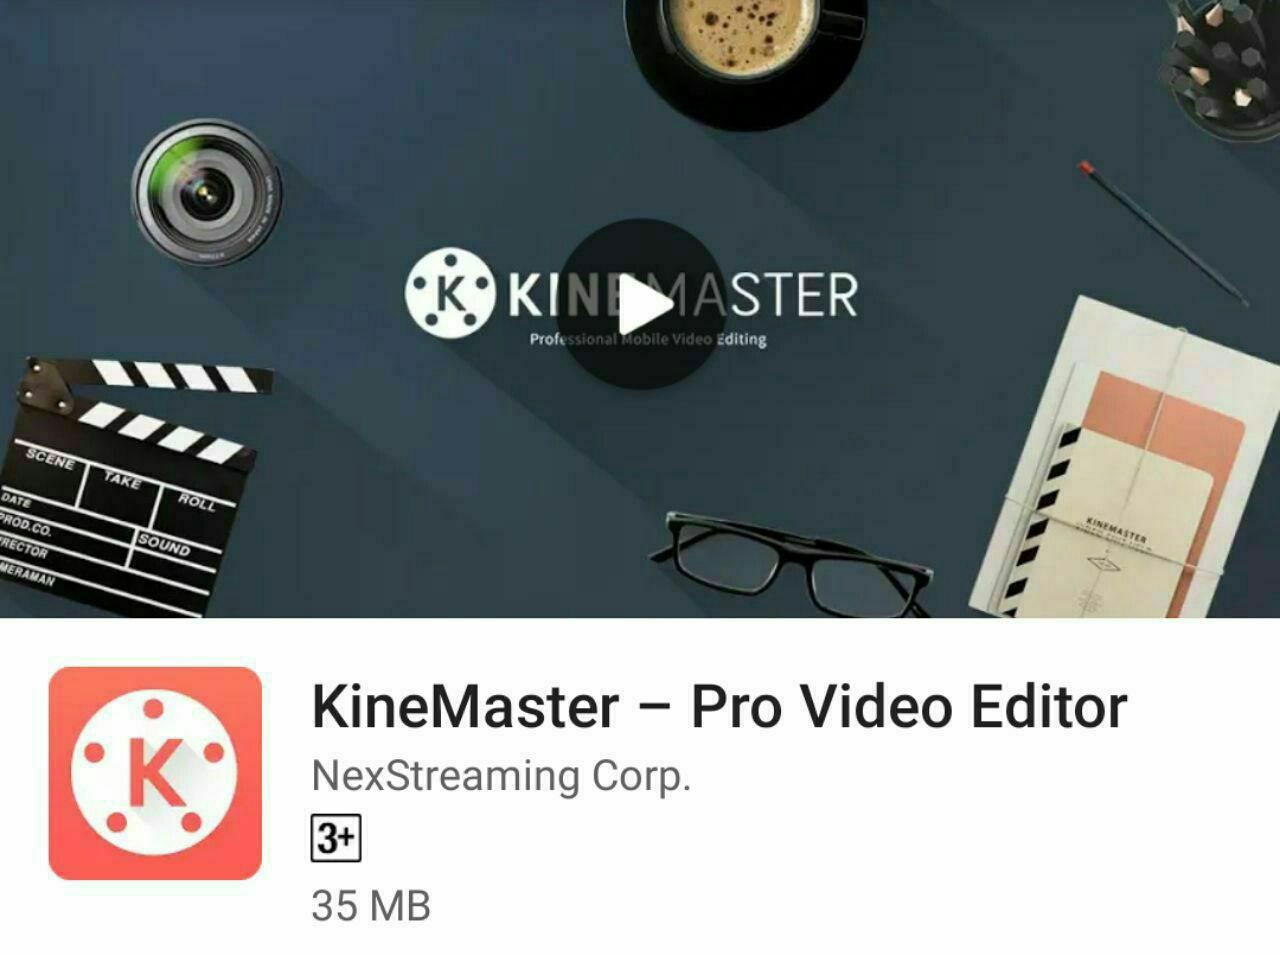 Download Kine master tamil font add - Ajith Tech Official